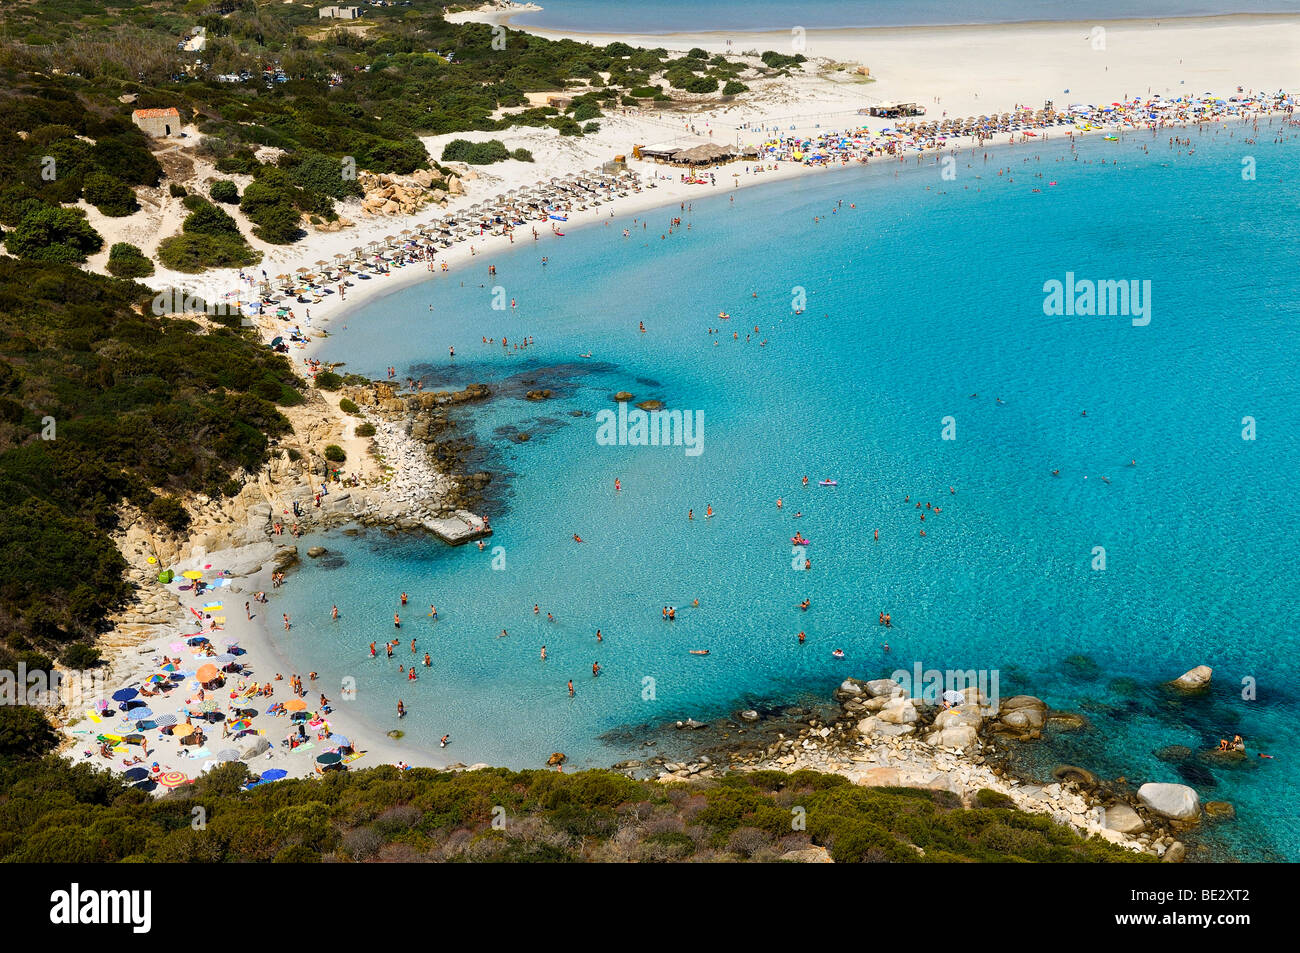 Bathing tourists and colorful parasols on the beach, crystal clear turquoise water, Cala Giunco, Porto Giunco, Capo Carbonara,  Stock Photo